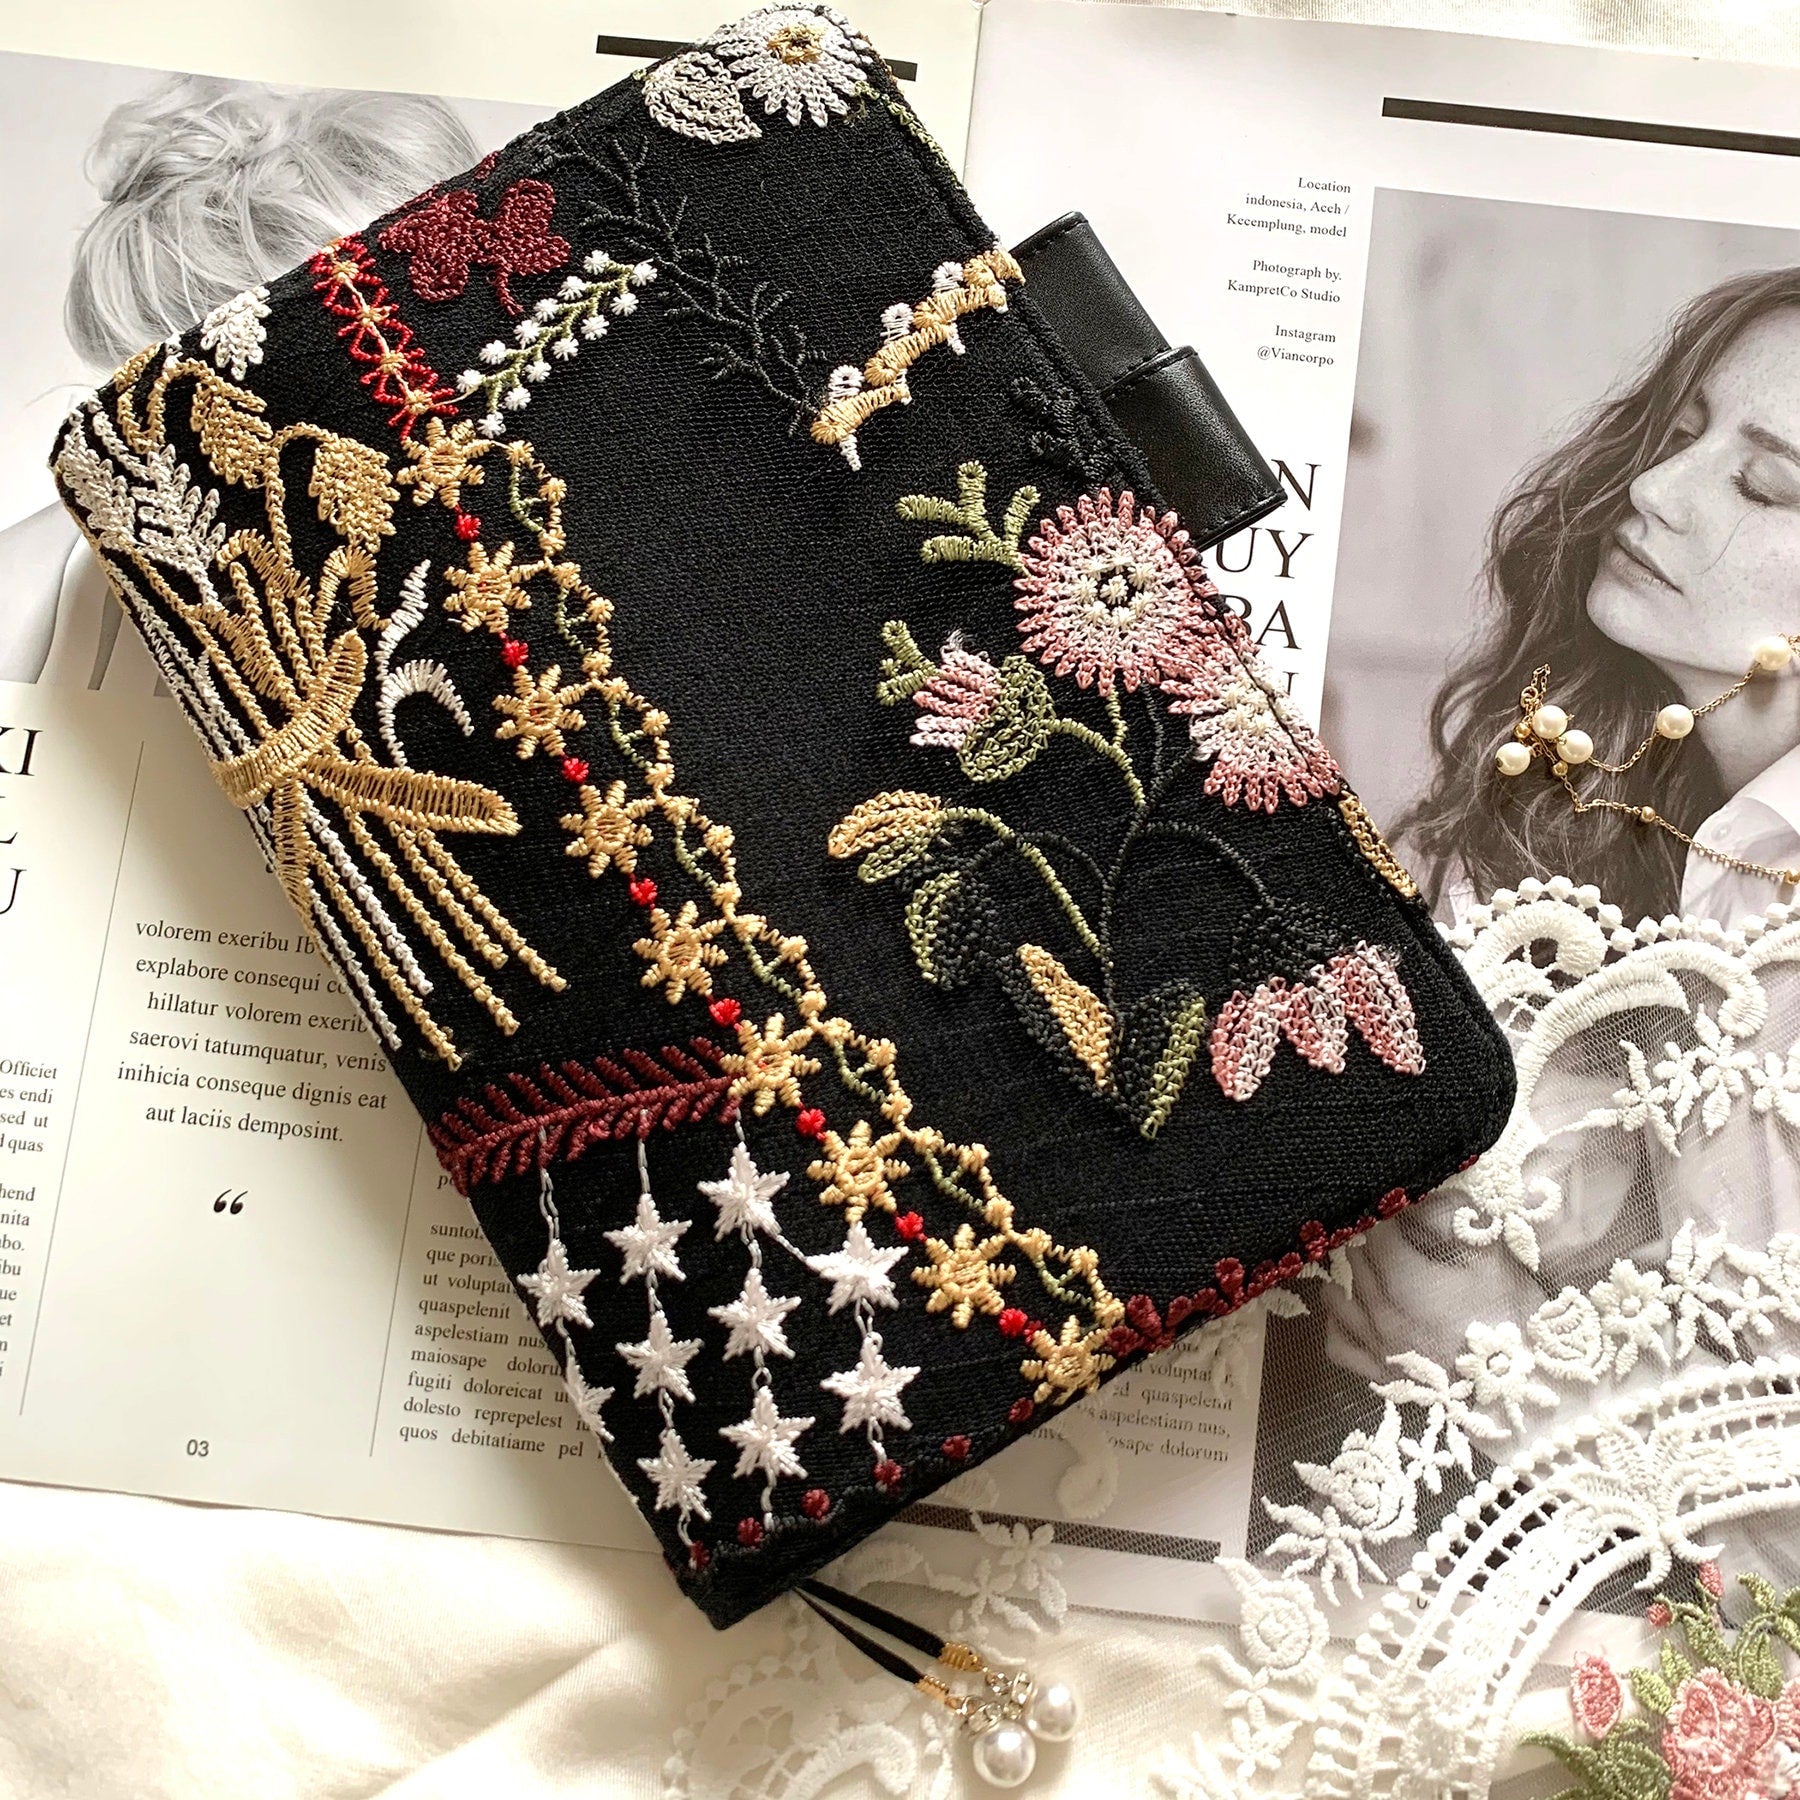 Black Organza Notebook Cover with Flower Embroidery A6 A5 Handmade Hobonichi Journal Planner Lined Dotted Blank Grid Sheets Gift for her